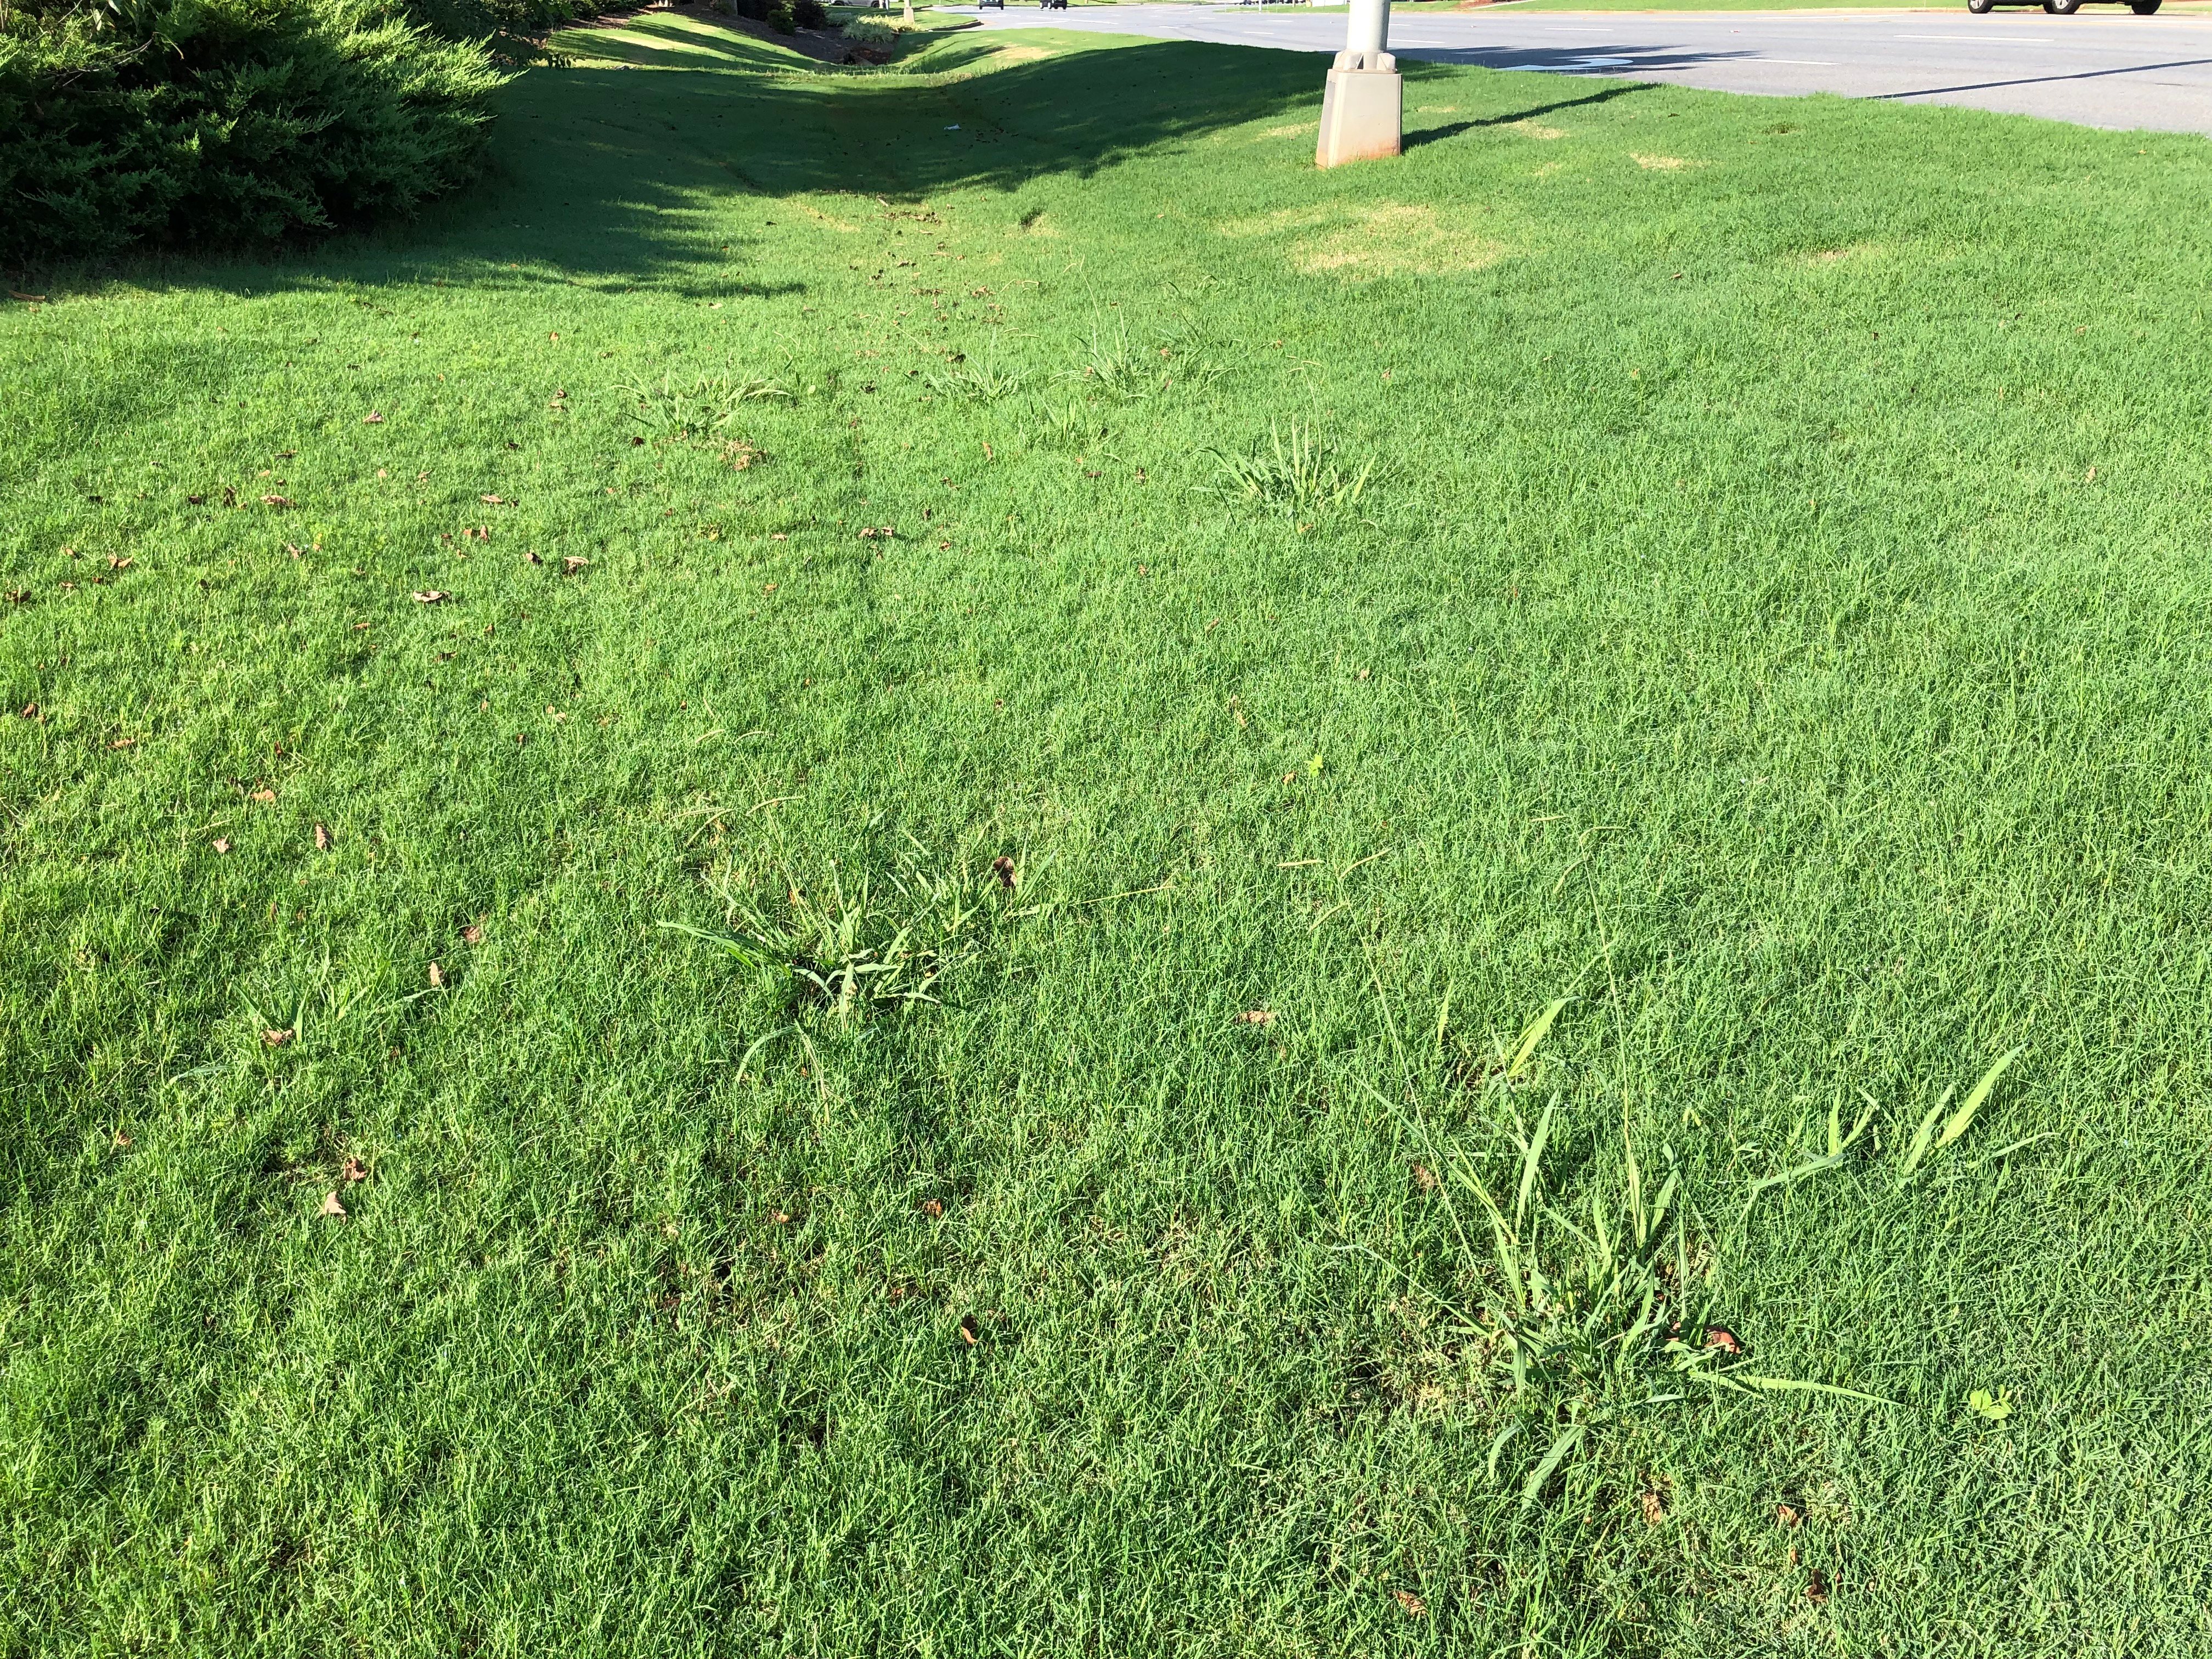 Dallisgrass in a low lying area in ditch